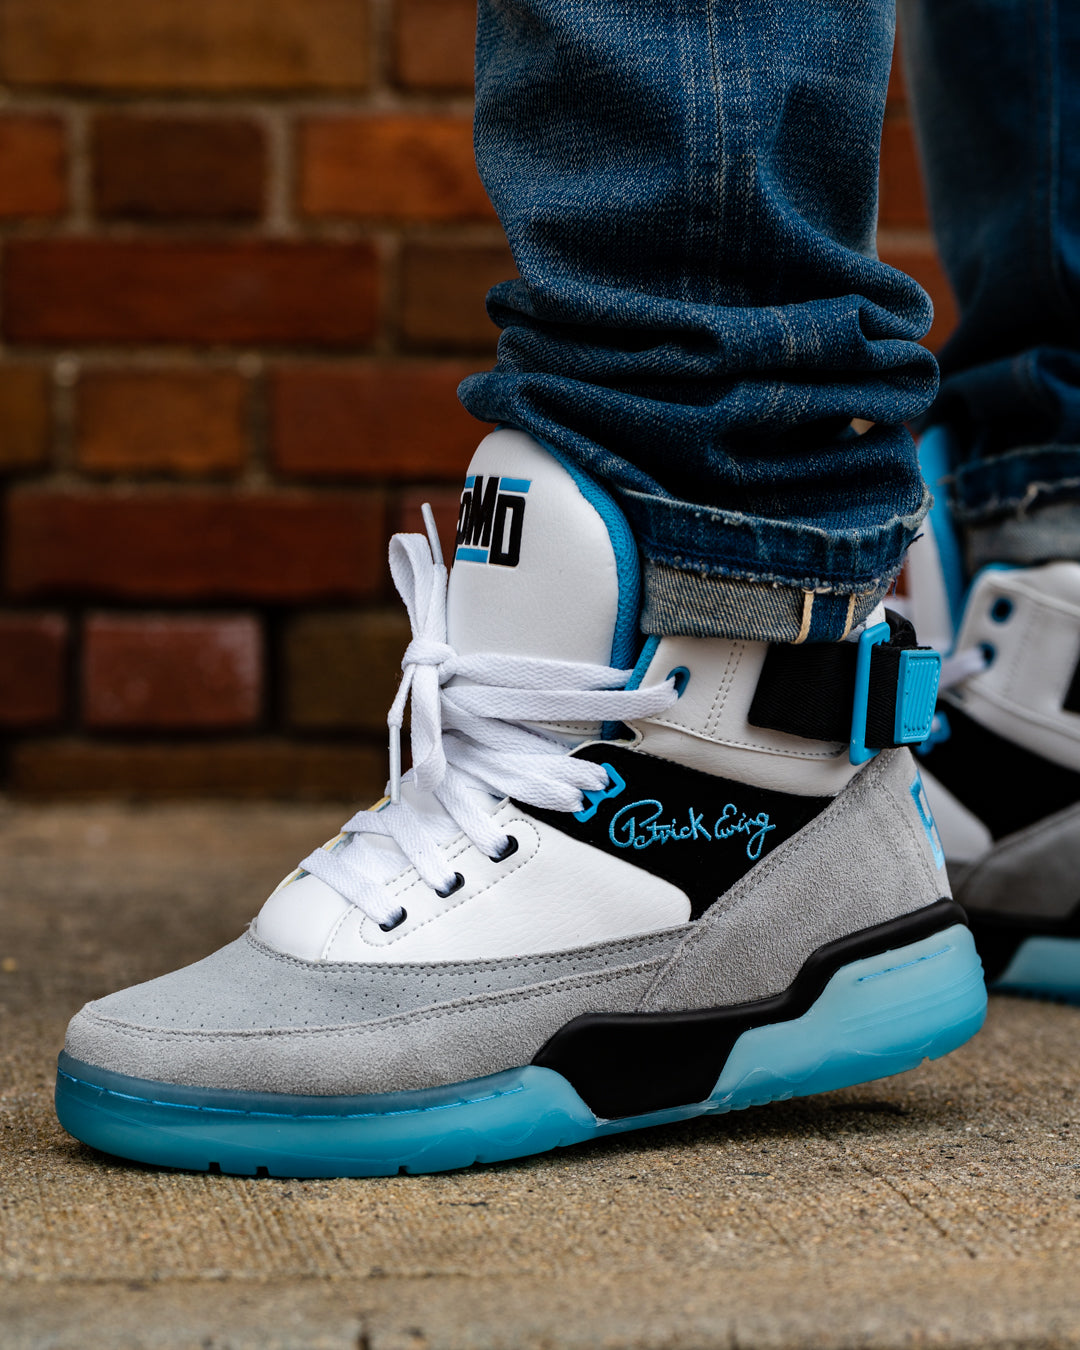 Ewing 33 Hi Unfinished Business EPMD lateral